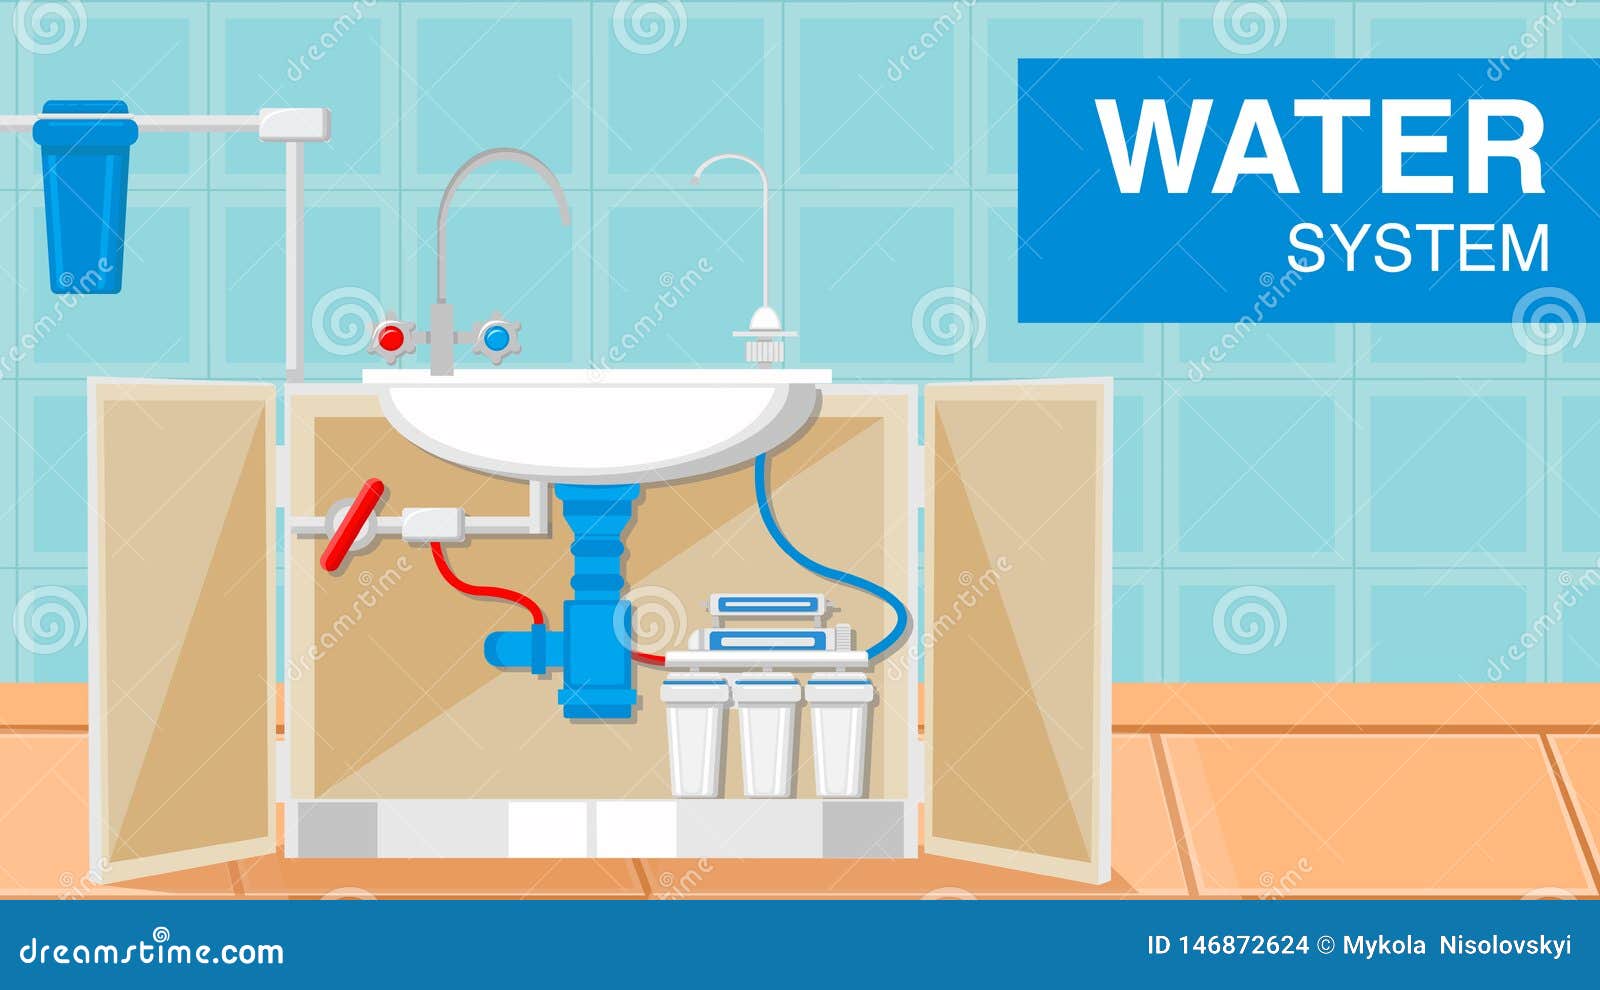 Water Plumbing Supply System Web Banner Template Stock